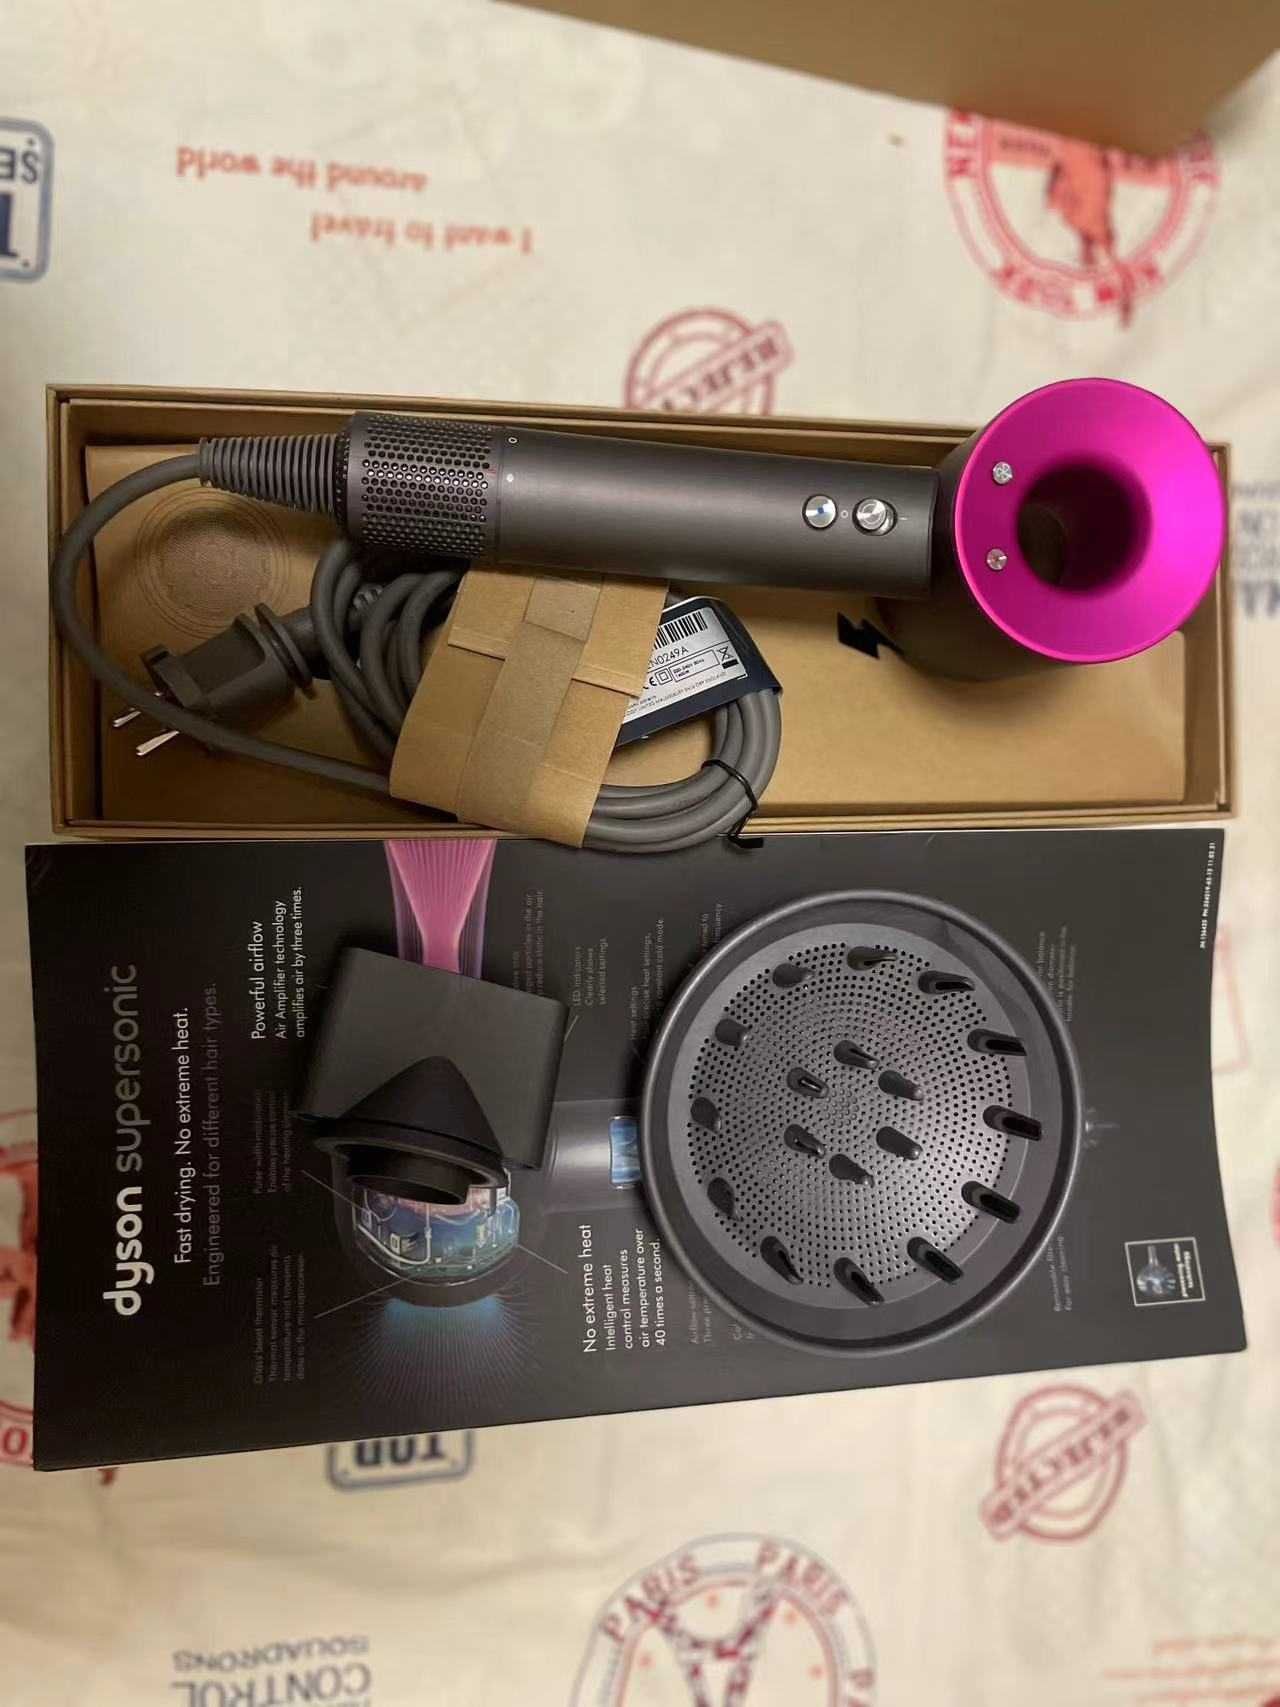 Brand new unopened Dyson HD08 rose There is awarranty code on the side